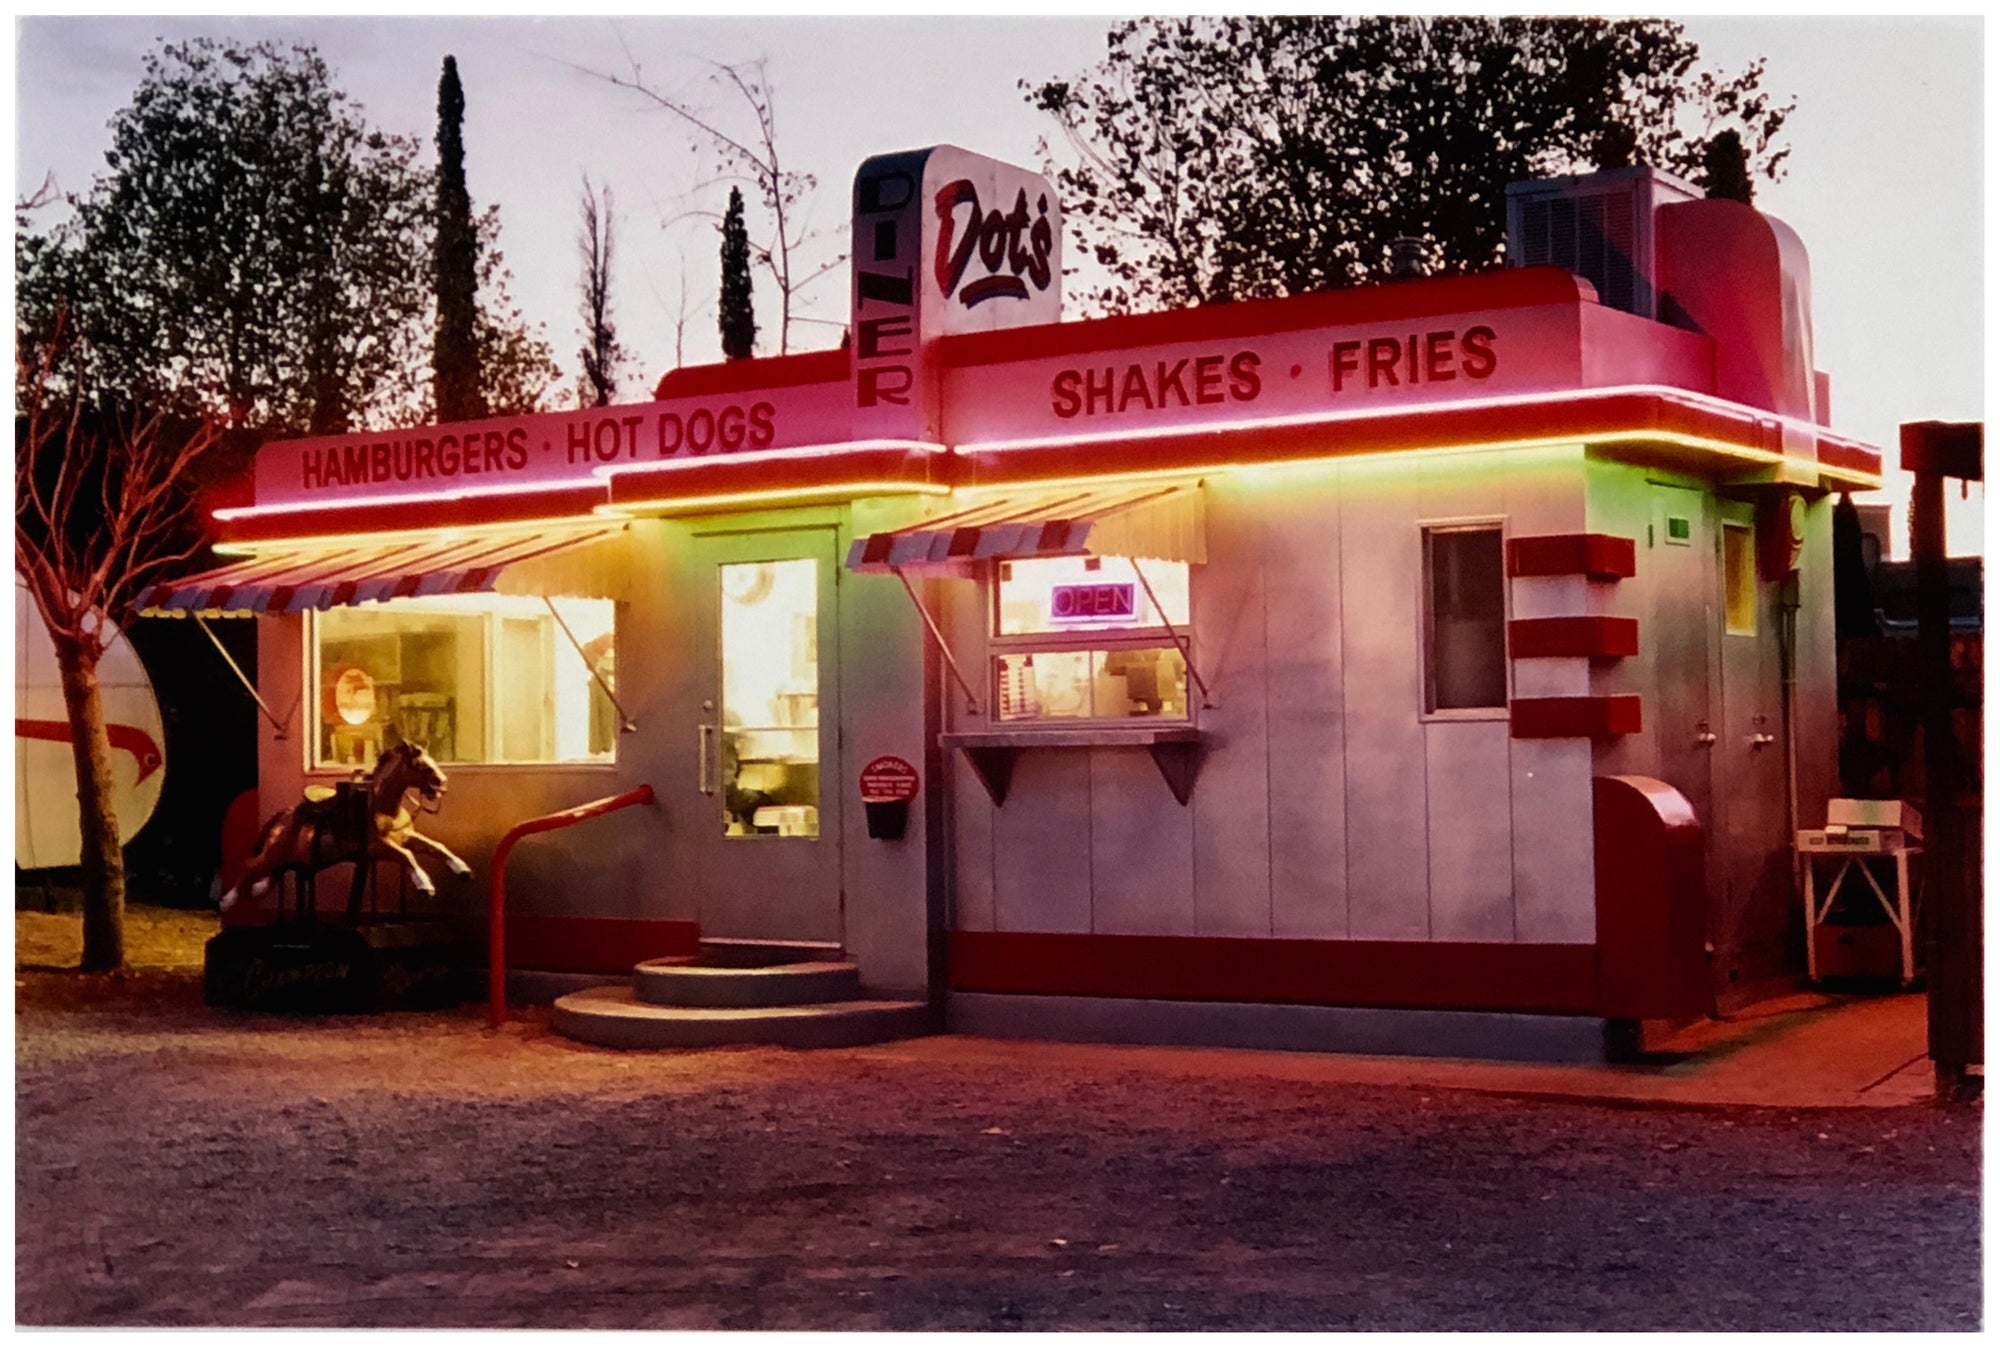 Photograph by Richard Heeps. This photograph depicts a one storey small building "Dot's Diner" brightly lit with a pink roof, with Hamburgers, Hot Dogs, Shakes, Fries written along the top width of the building.